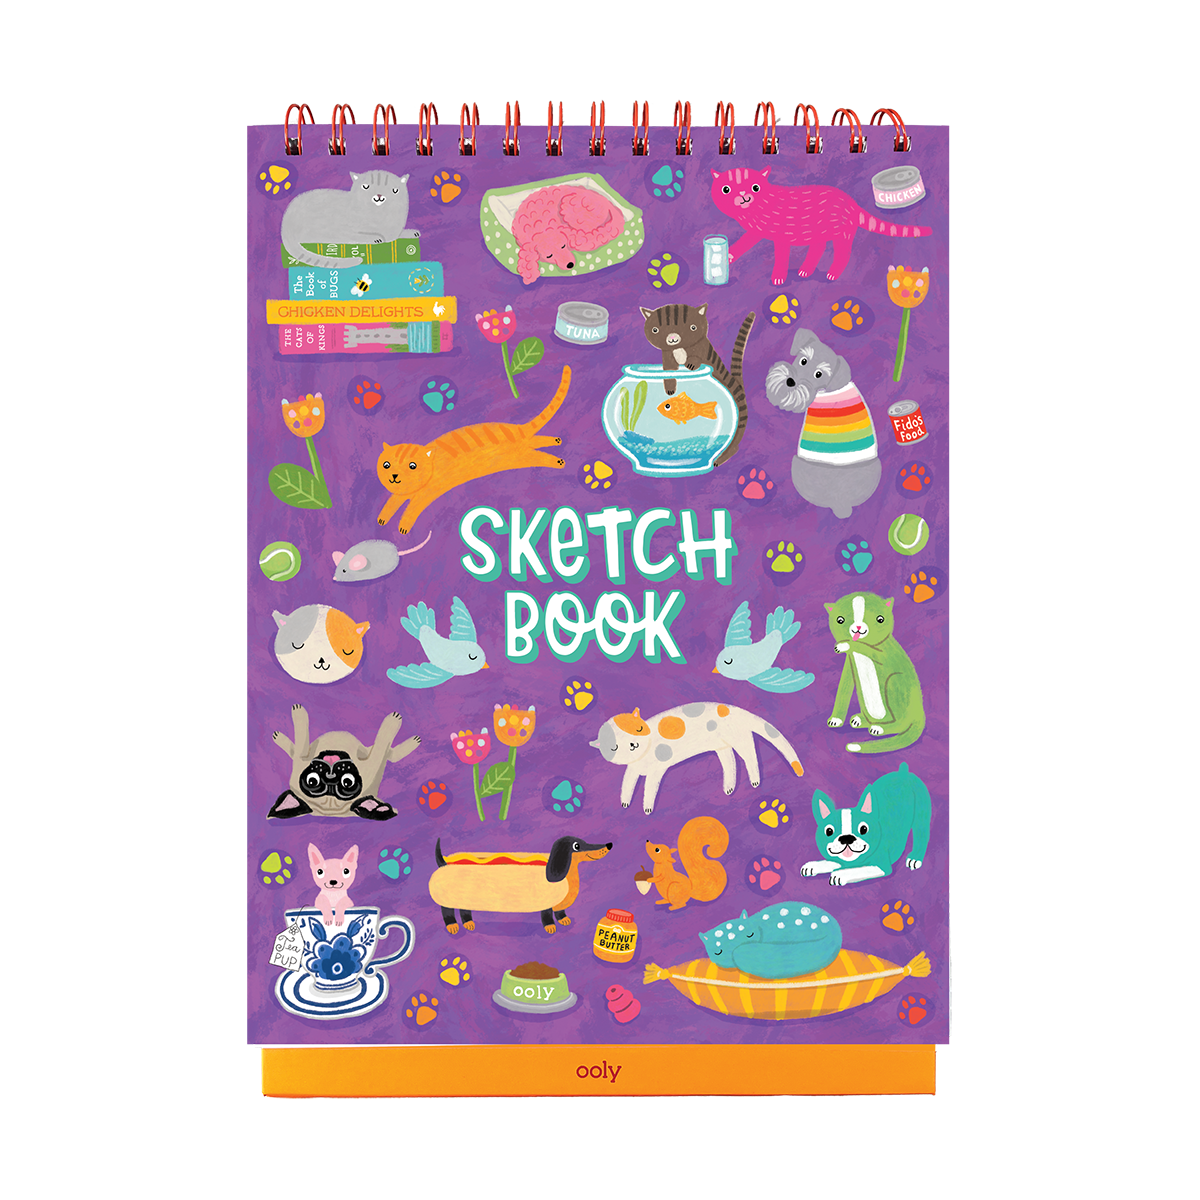 Sketch & Show Standing Sketchbook - Pets at Play by OOLY